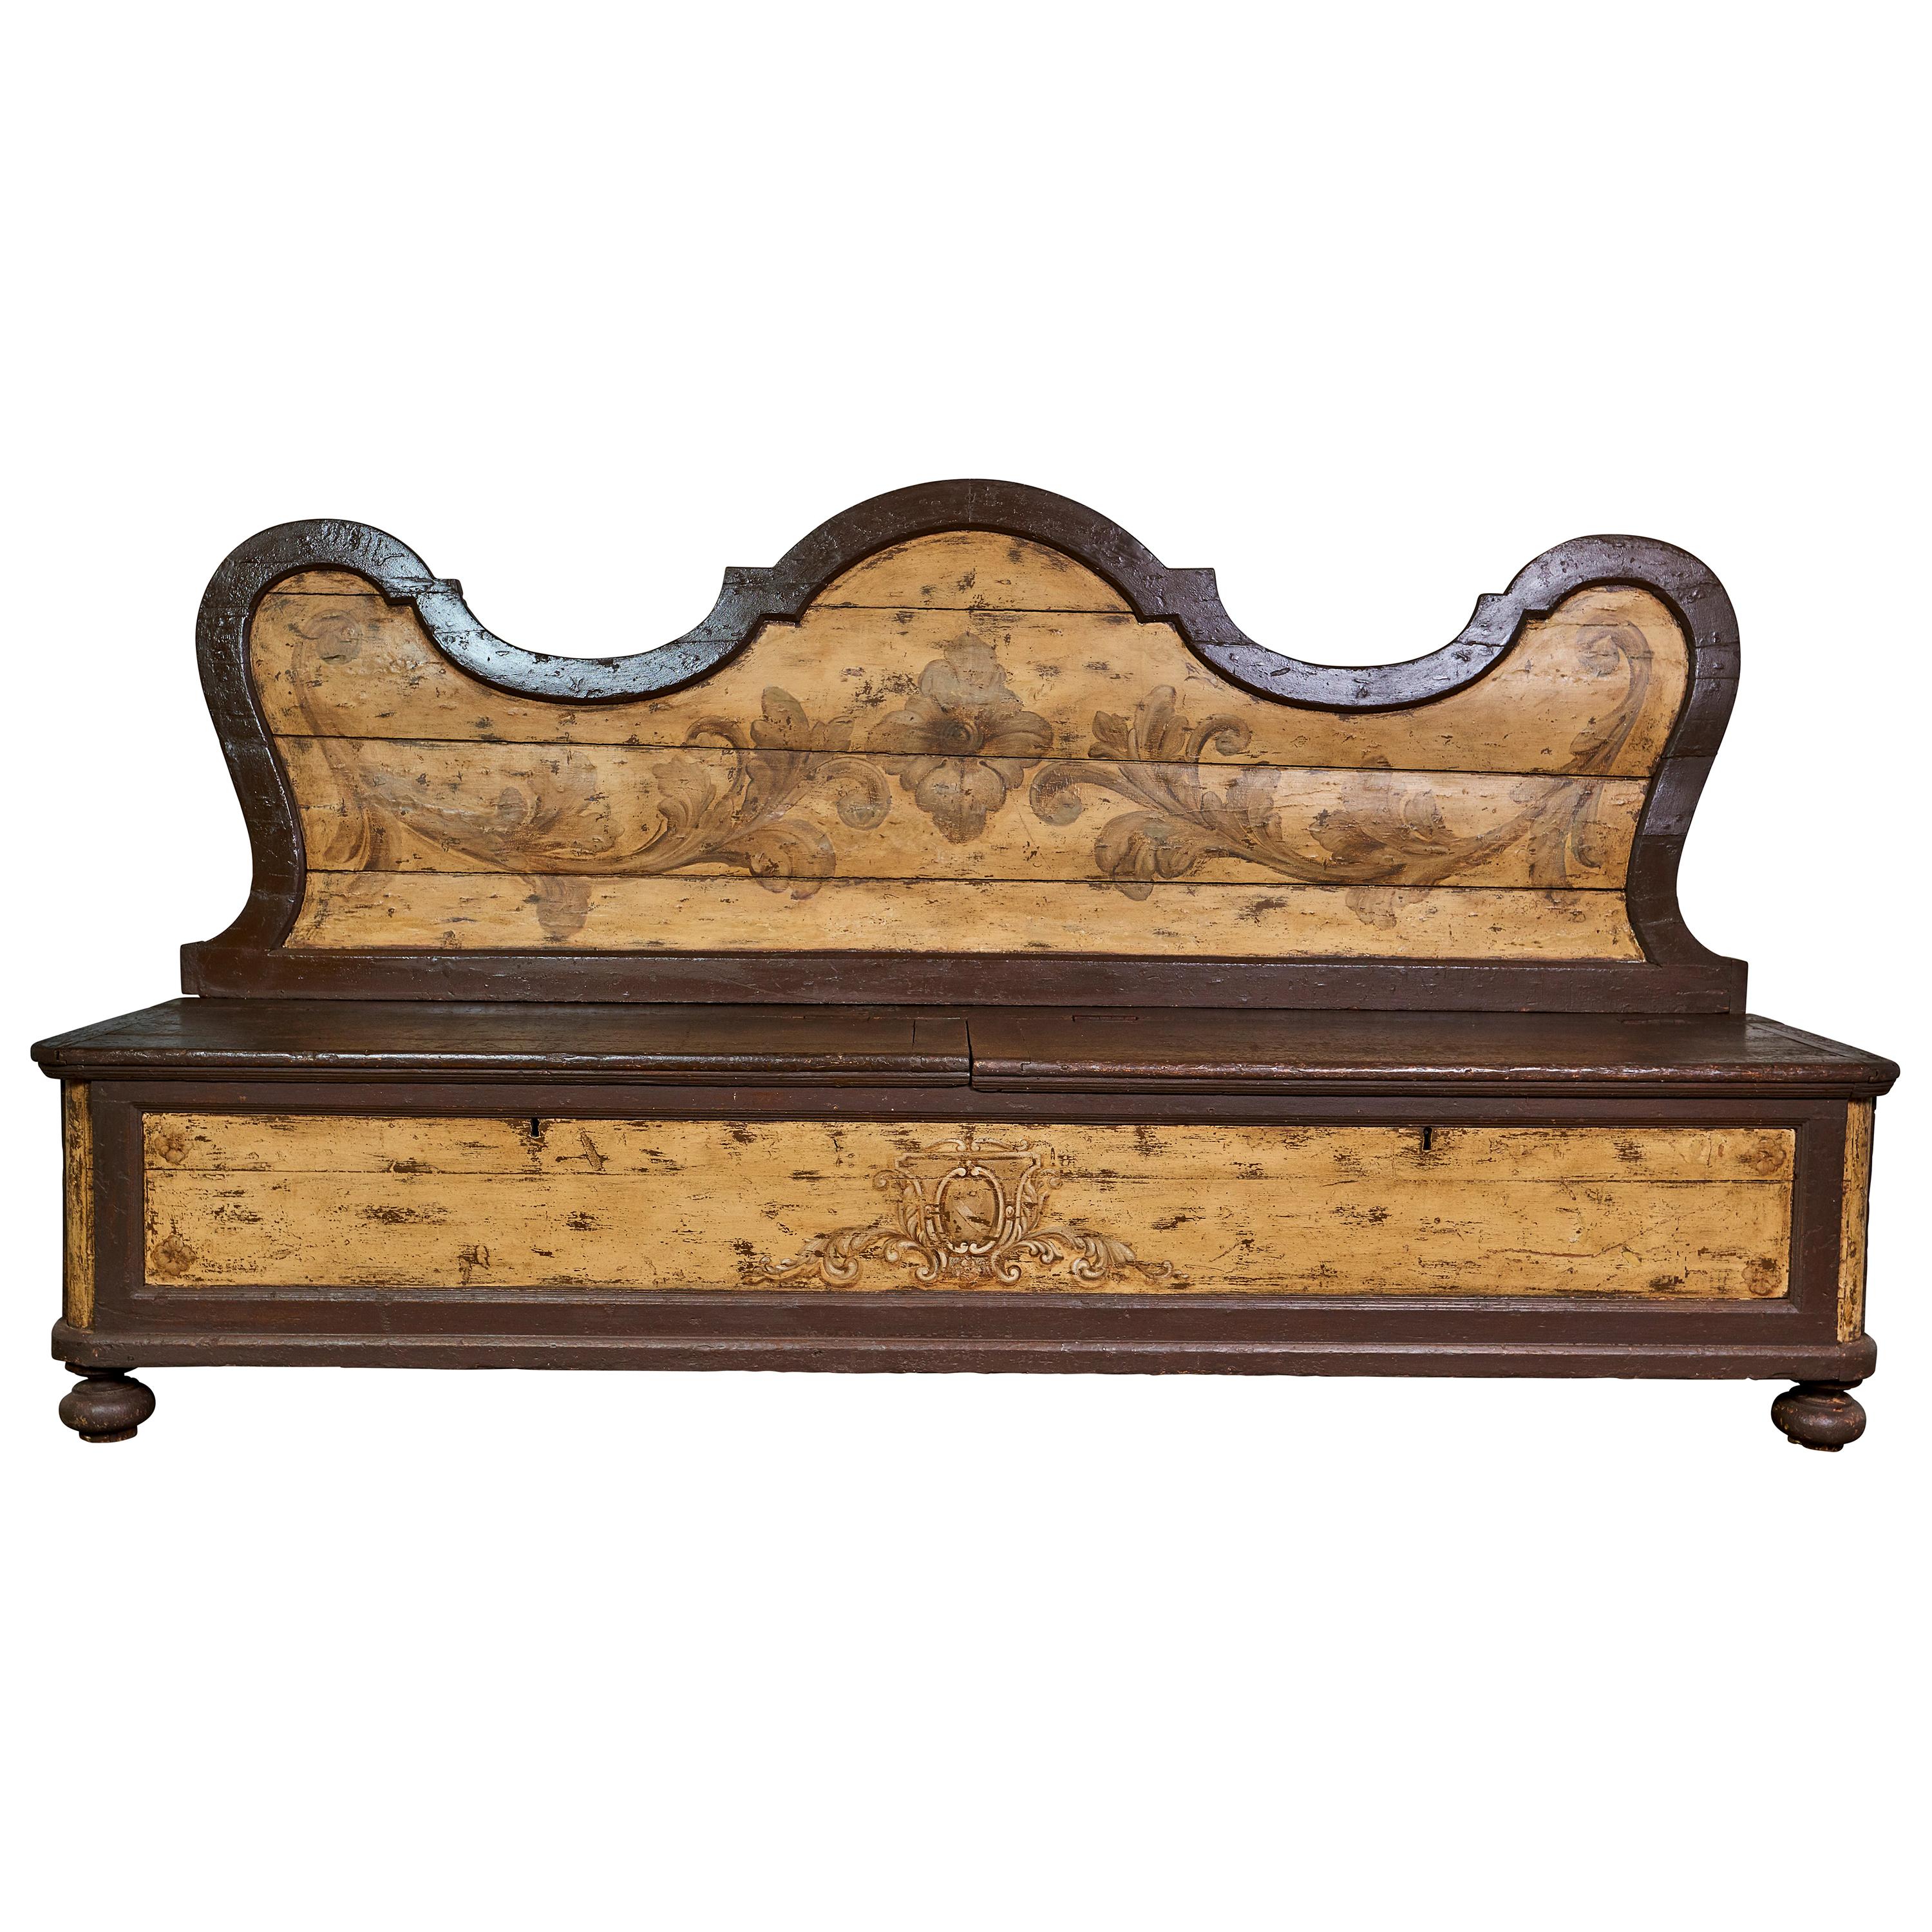 Monumental 19th Century Northern Italian Hand Painted Bench For Sale